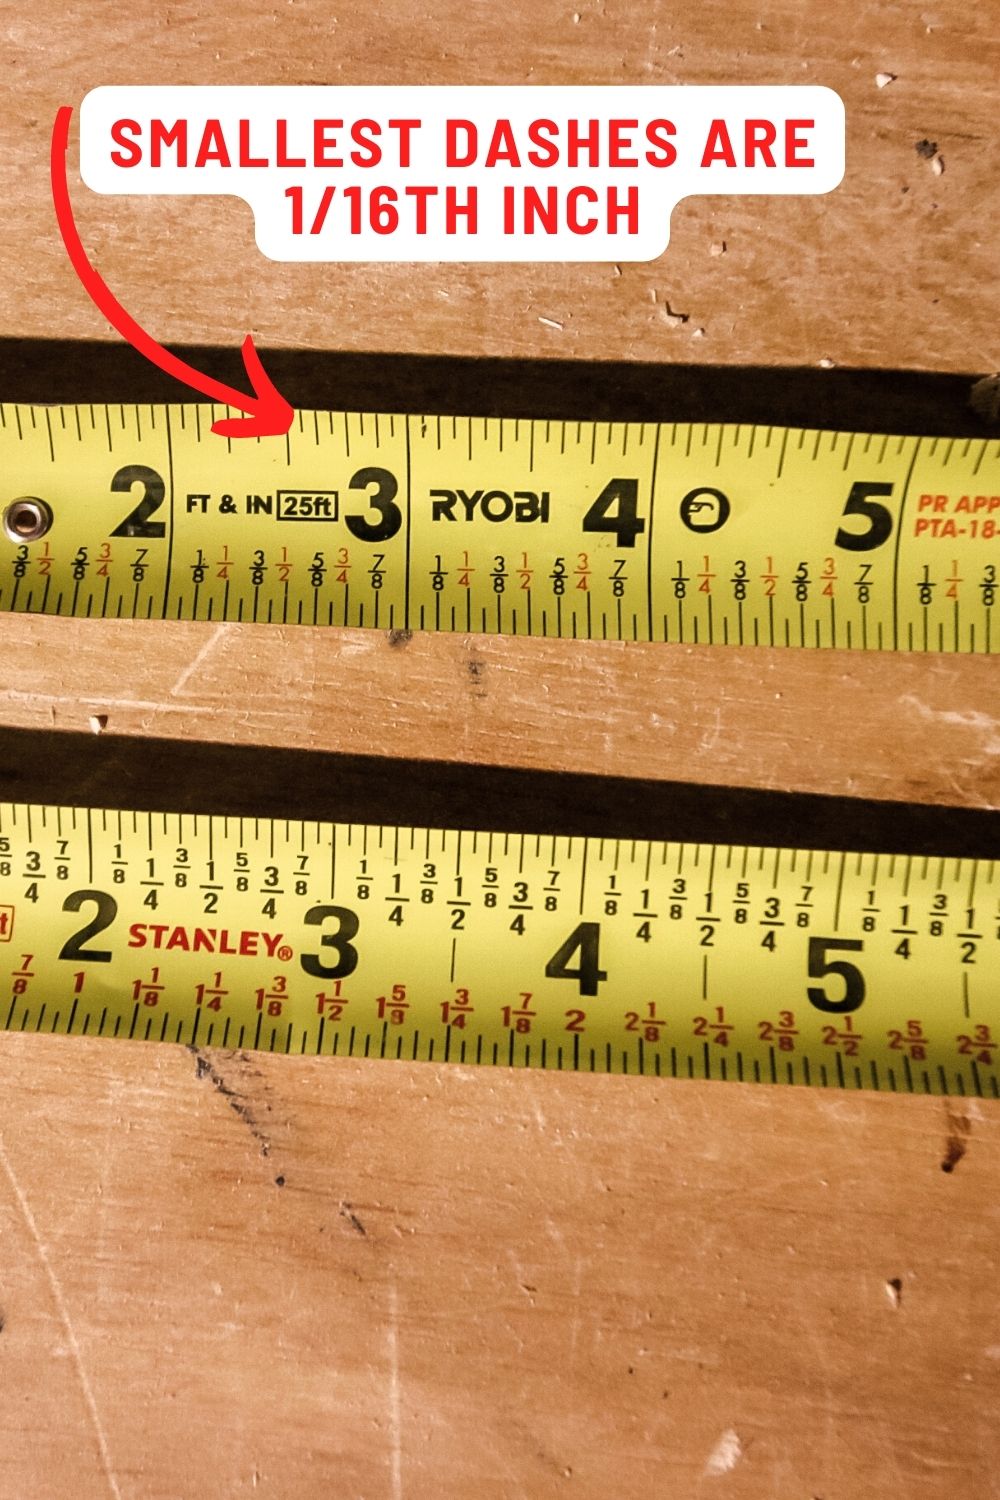 How to Read a Tape Measure - Tips, Tricks & Mistakes to Avoid